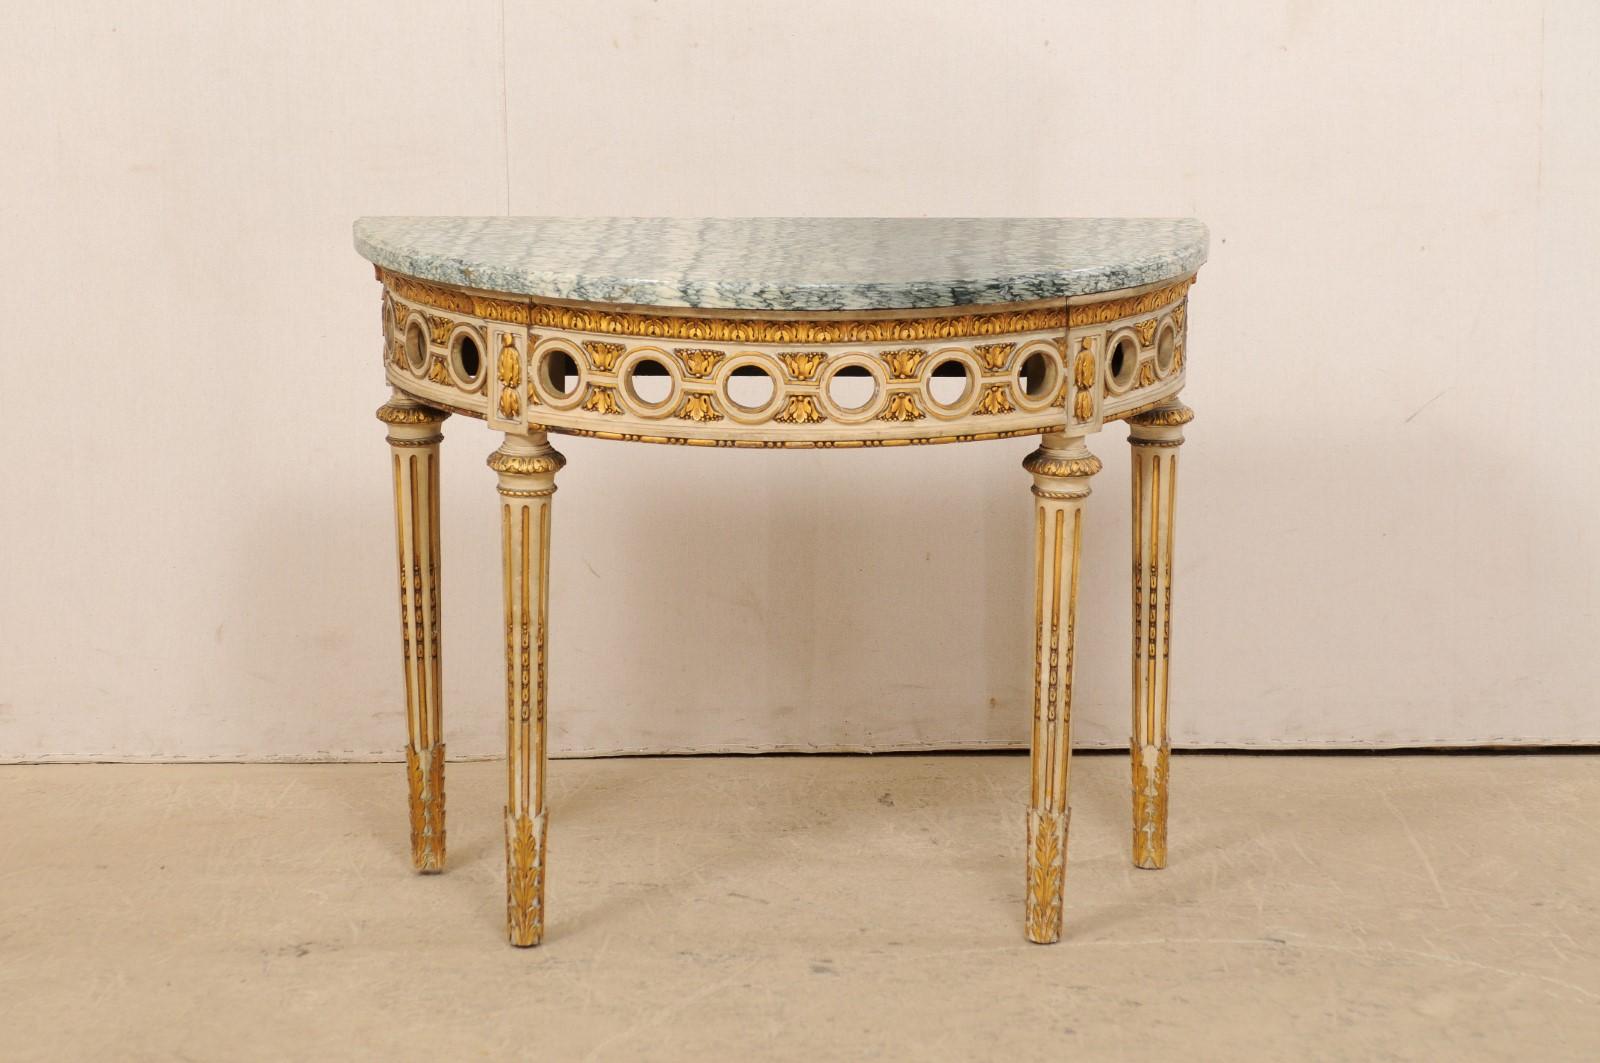 A French beautifully carved and giltwood demilune table with marble top from the 1920s. This antique console table from France features a half-moon shaped marble top which rests upon an exquisitely carved base and legs, adorn with dot-and-line